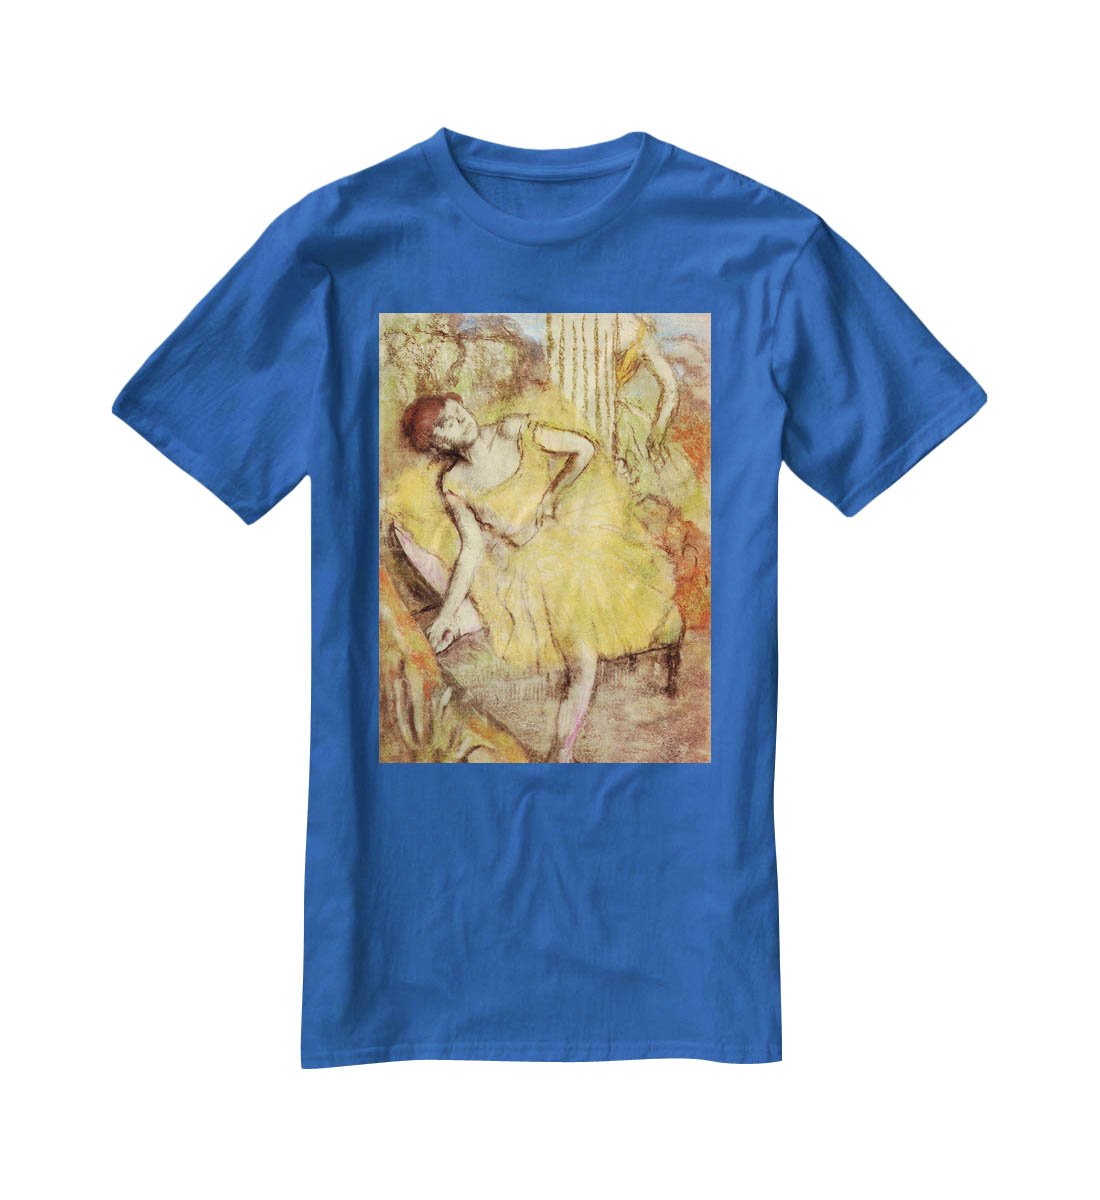 Sitting dancer with the right leg up by Degas T-Shirt - Canvas Art Rocks - 2